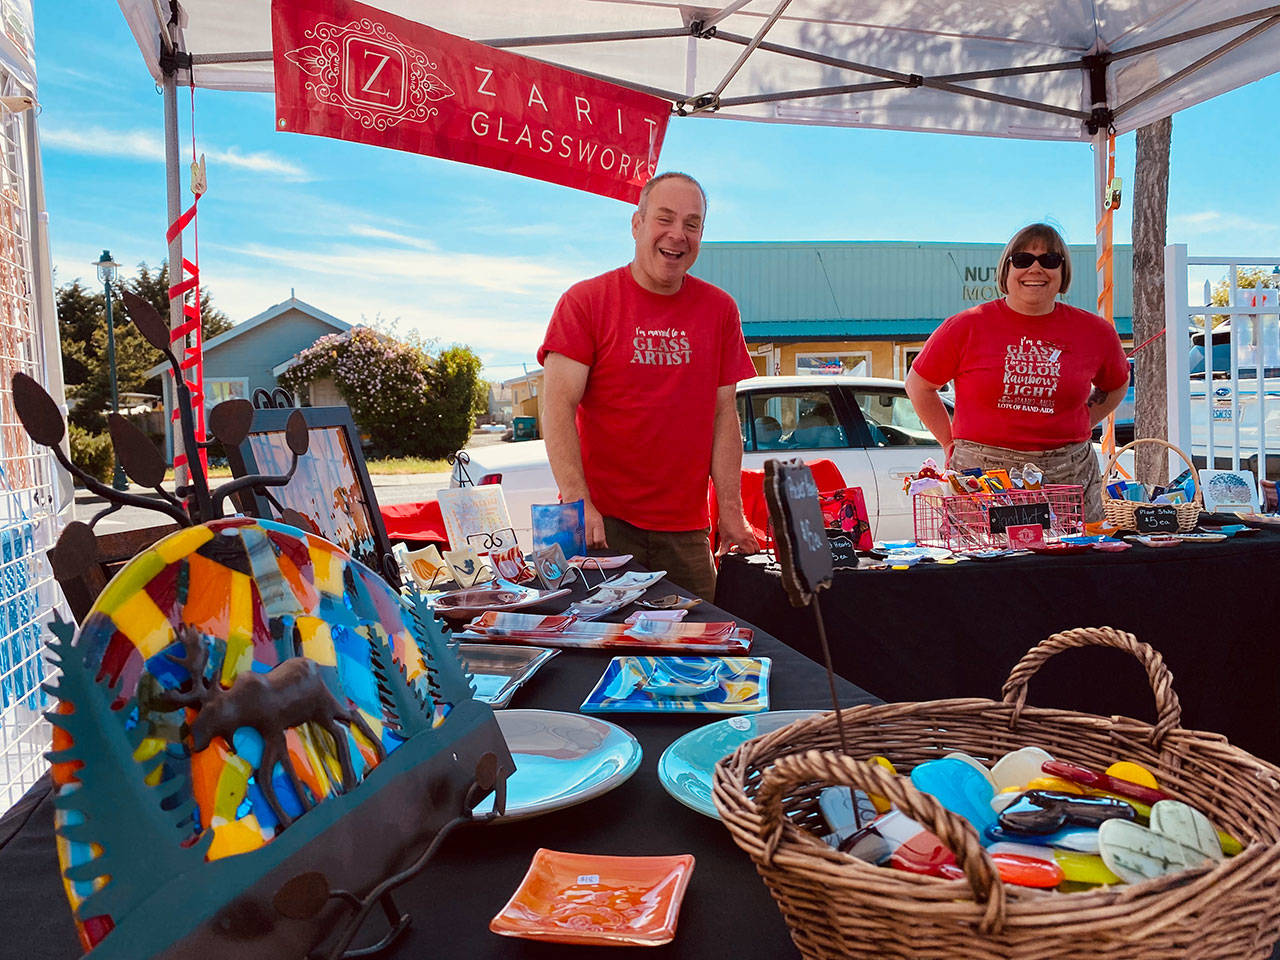 Susan Zarit, artist and owner of Zarit Glassworks, and husband Steve display the company’s wares at the Sequim Farmers & Artisans Market. Photos by Emma Jane”EJ” Garcia